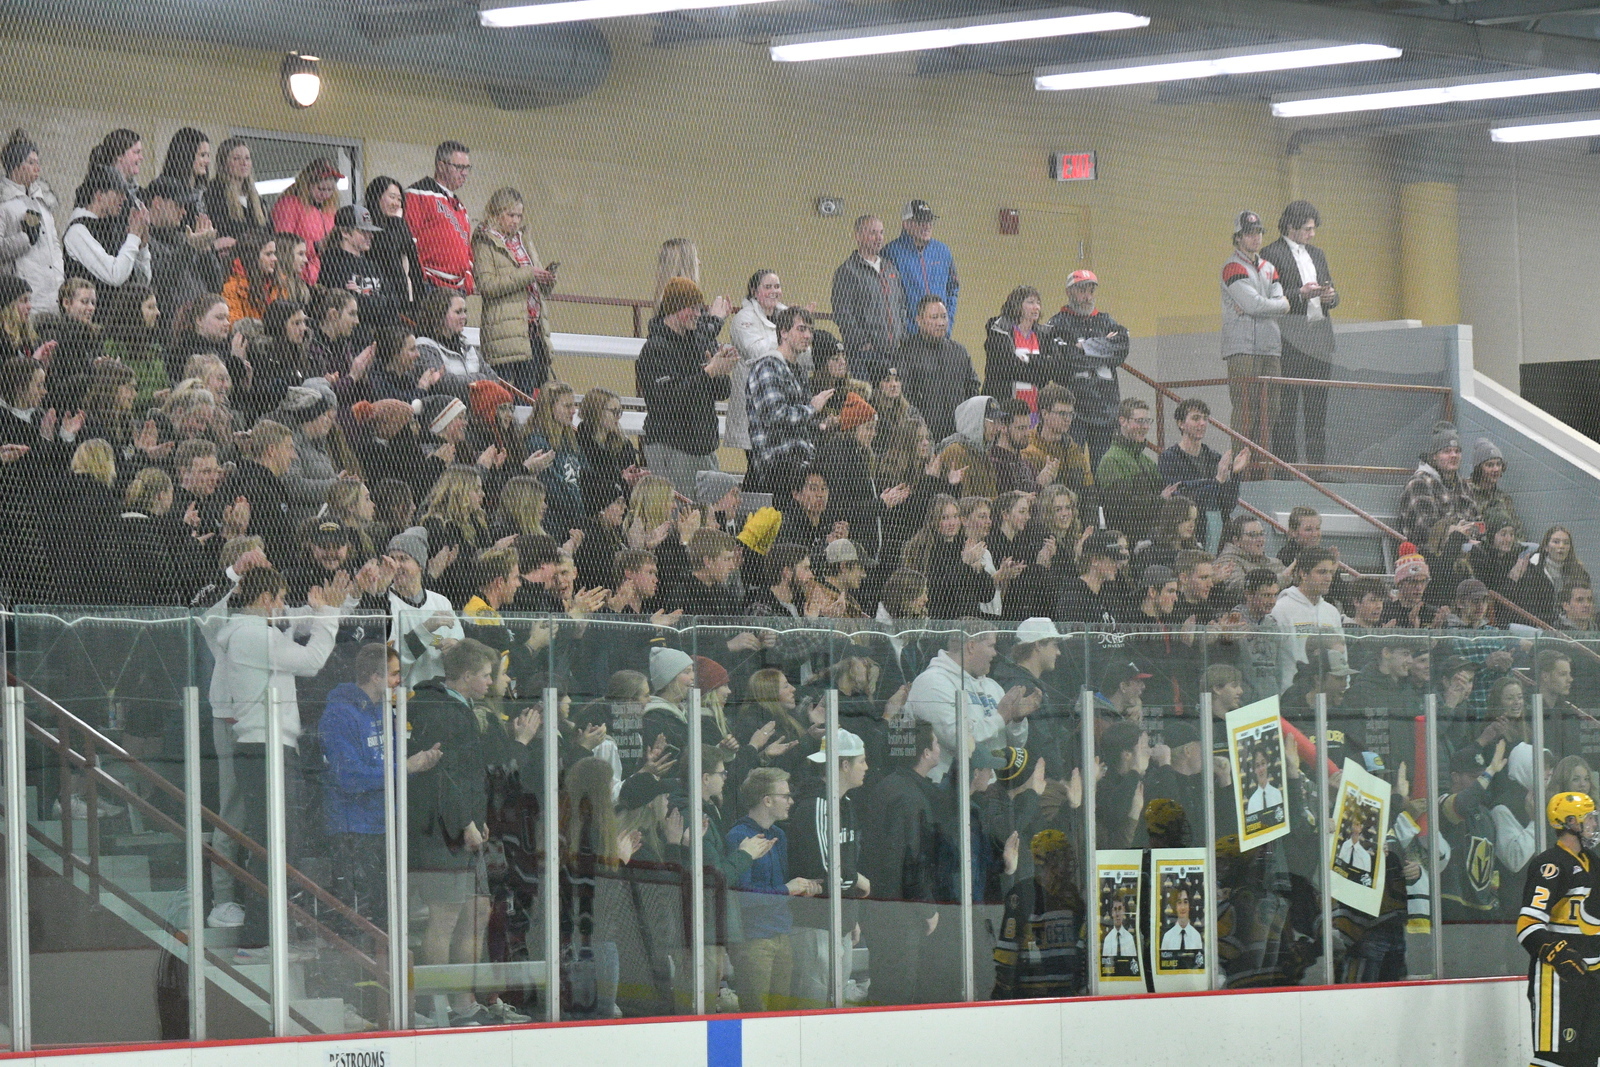 A picture of the crowd cheering at a hockey game